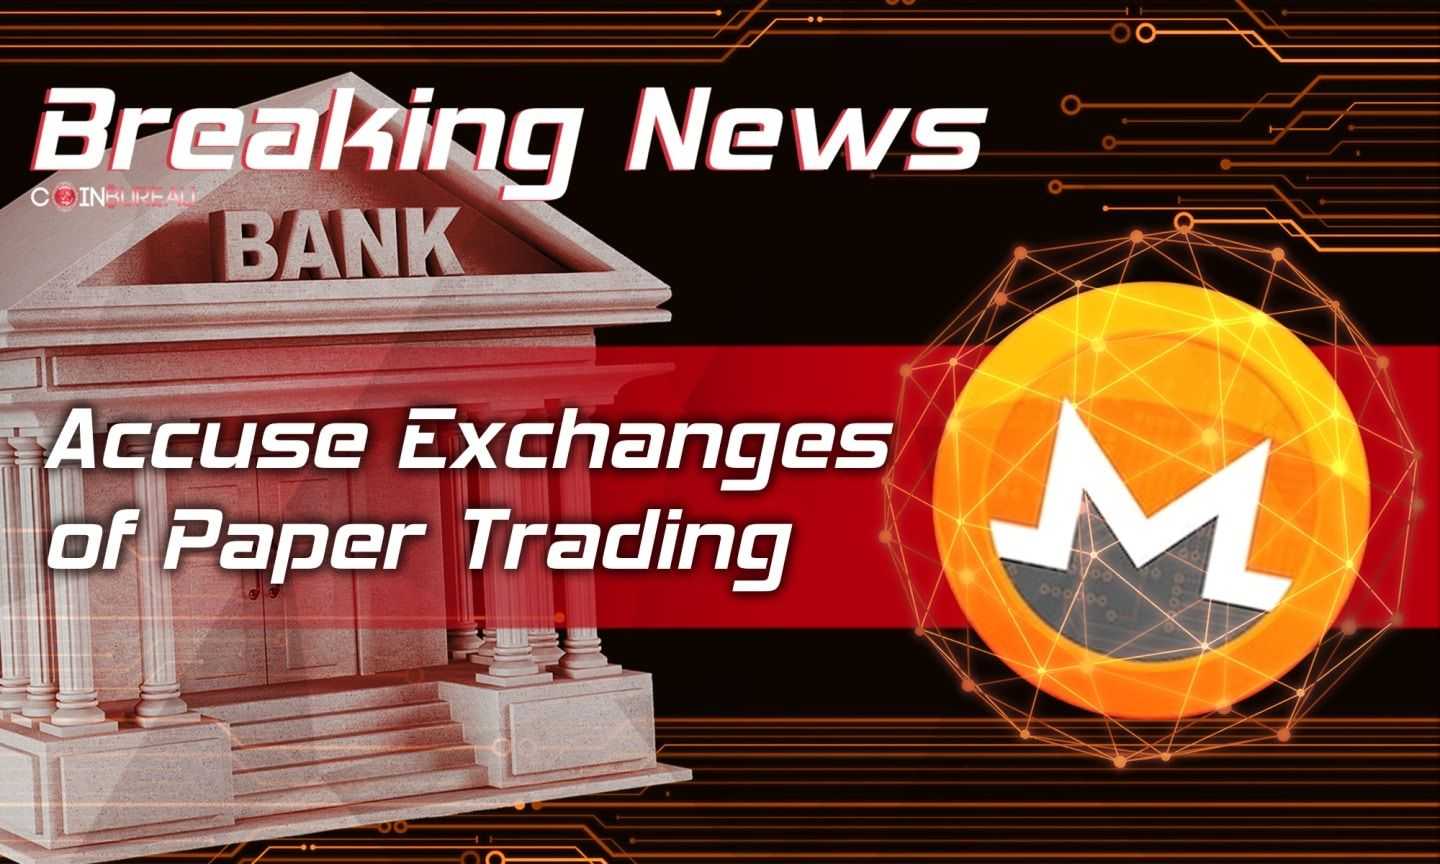 Monero (XMR) Supporters Accuse Exchanges of Paper Trading, Coordinate a ‘Bank Run’